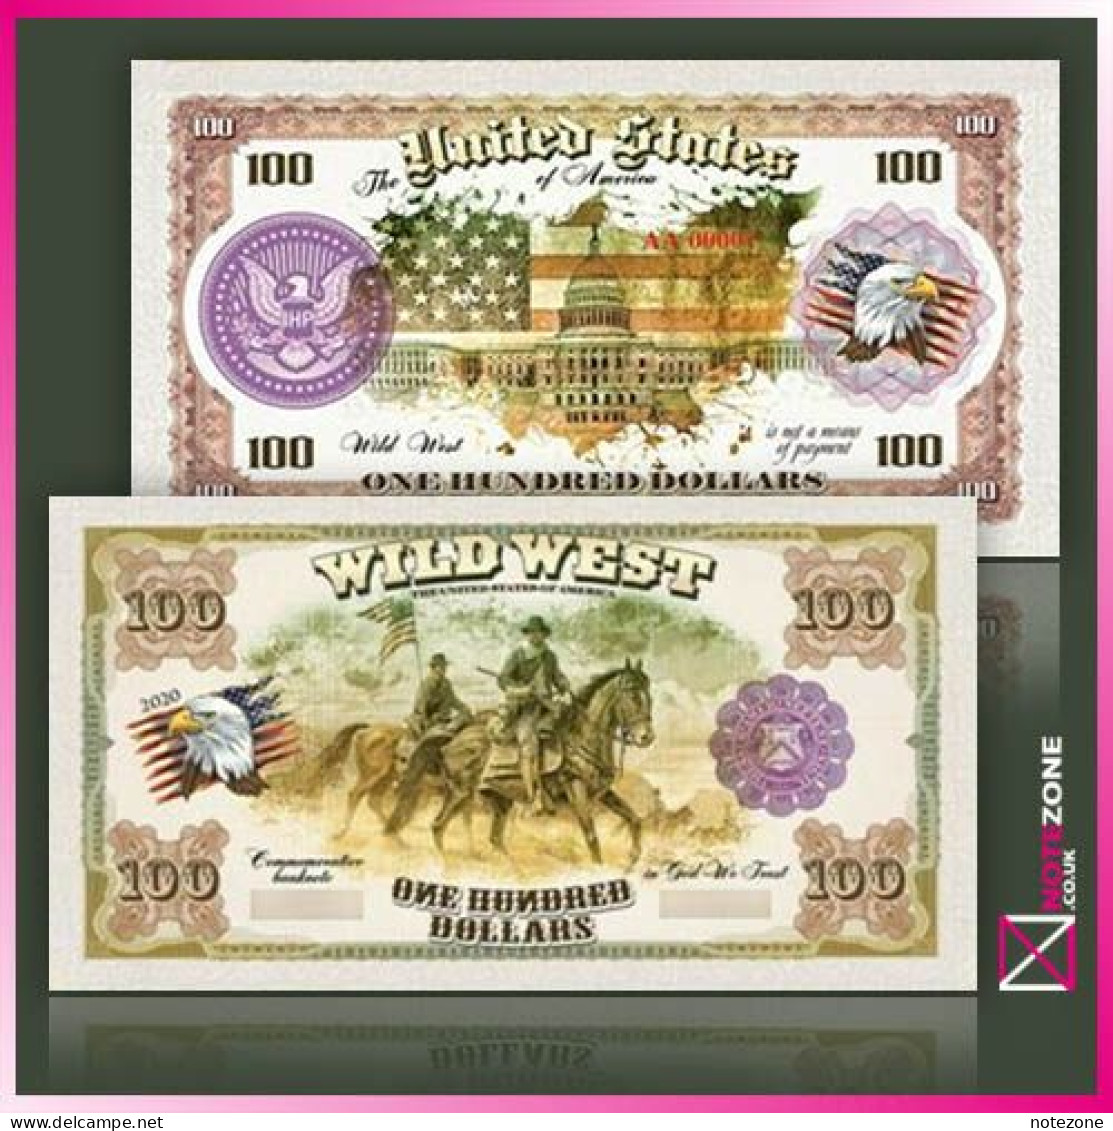 $100 USA Native Americans Wild West The Civil War PLASTIC Notes With Spot UV Private Fantasy - Collections